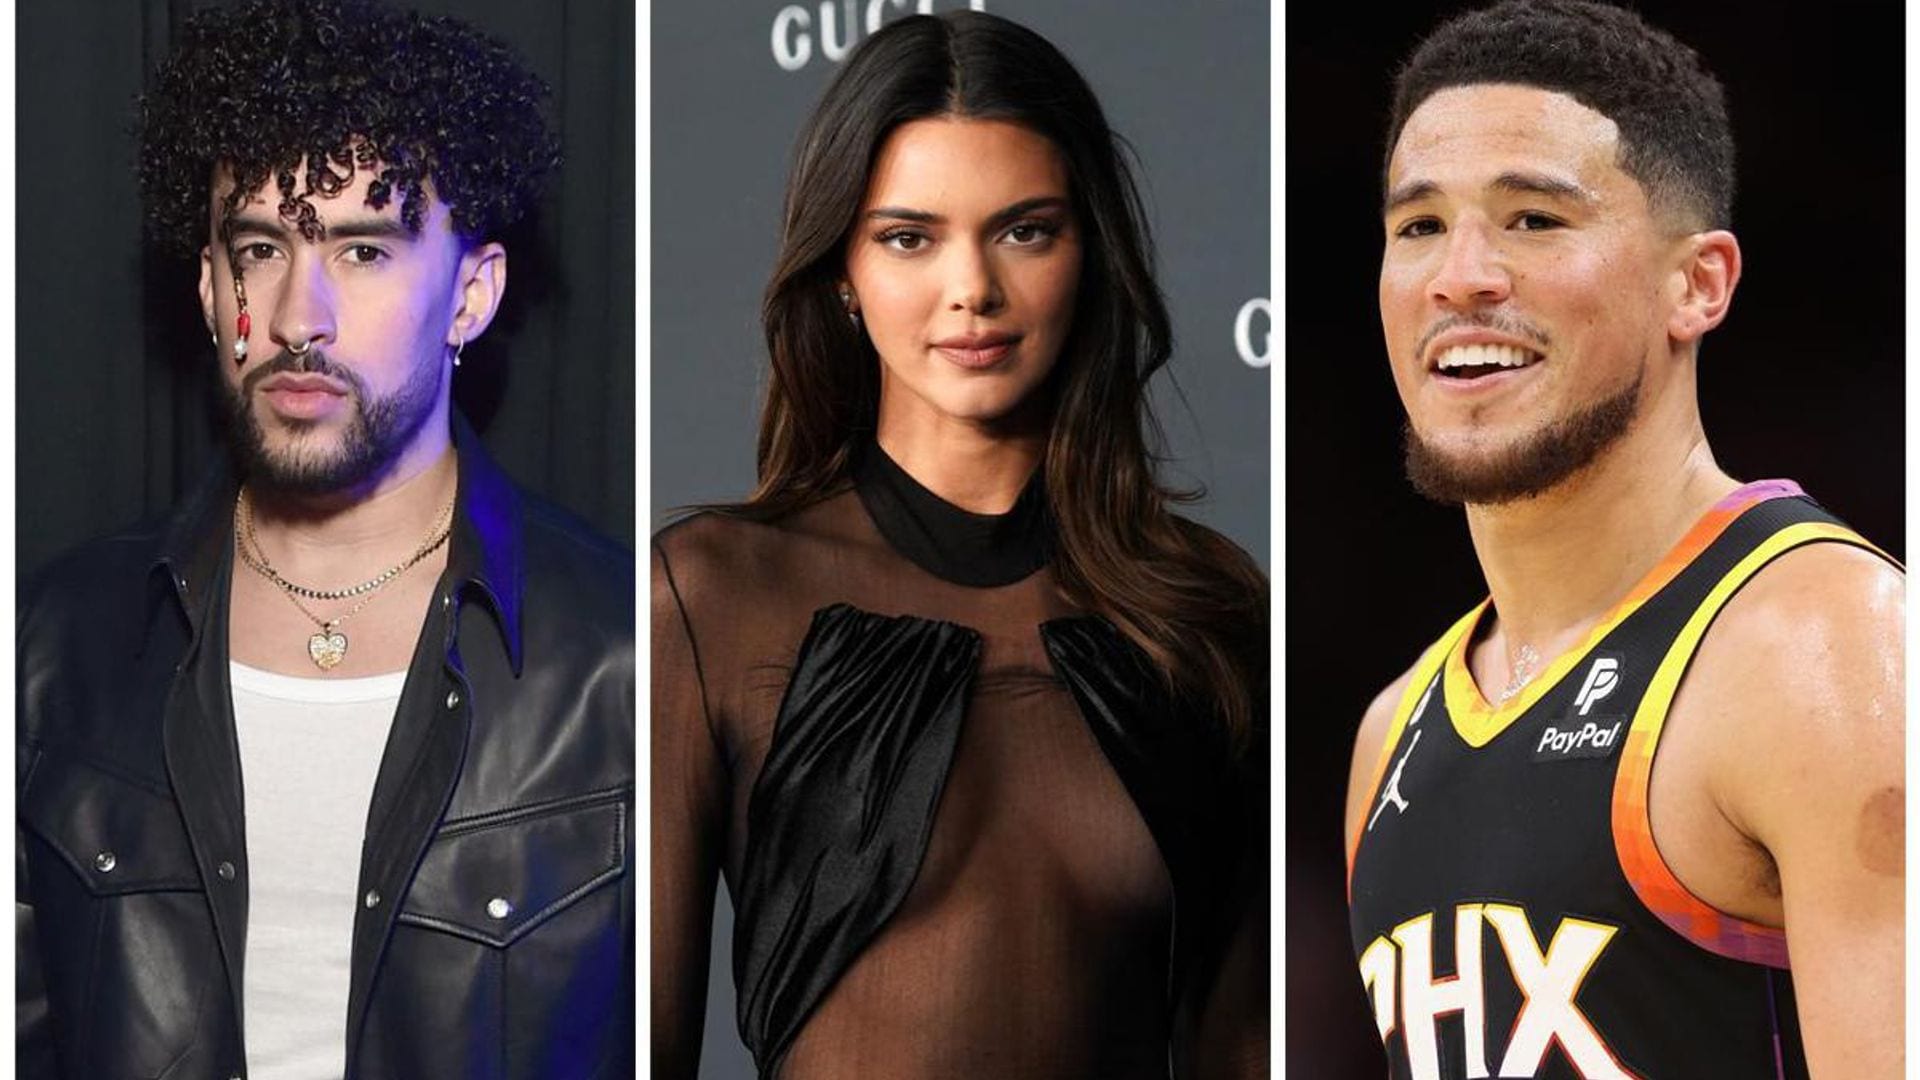 Kendall Jenner’s ex thinks Bad Bunny is not ‘her type’